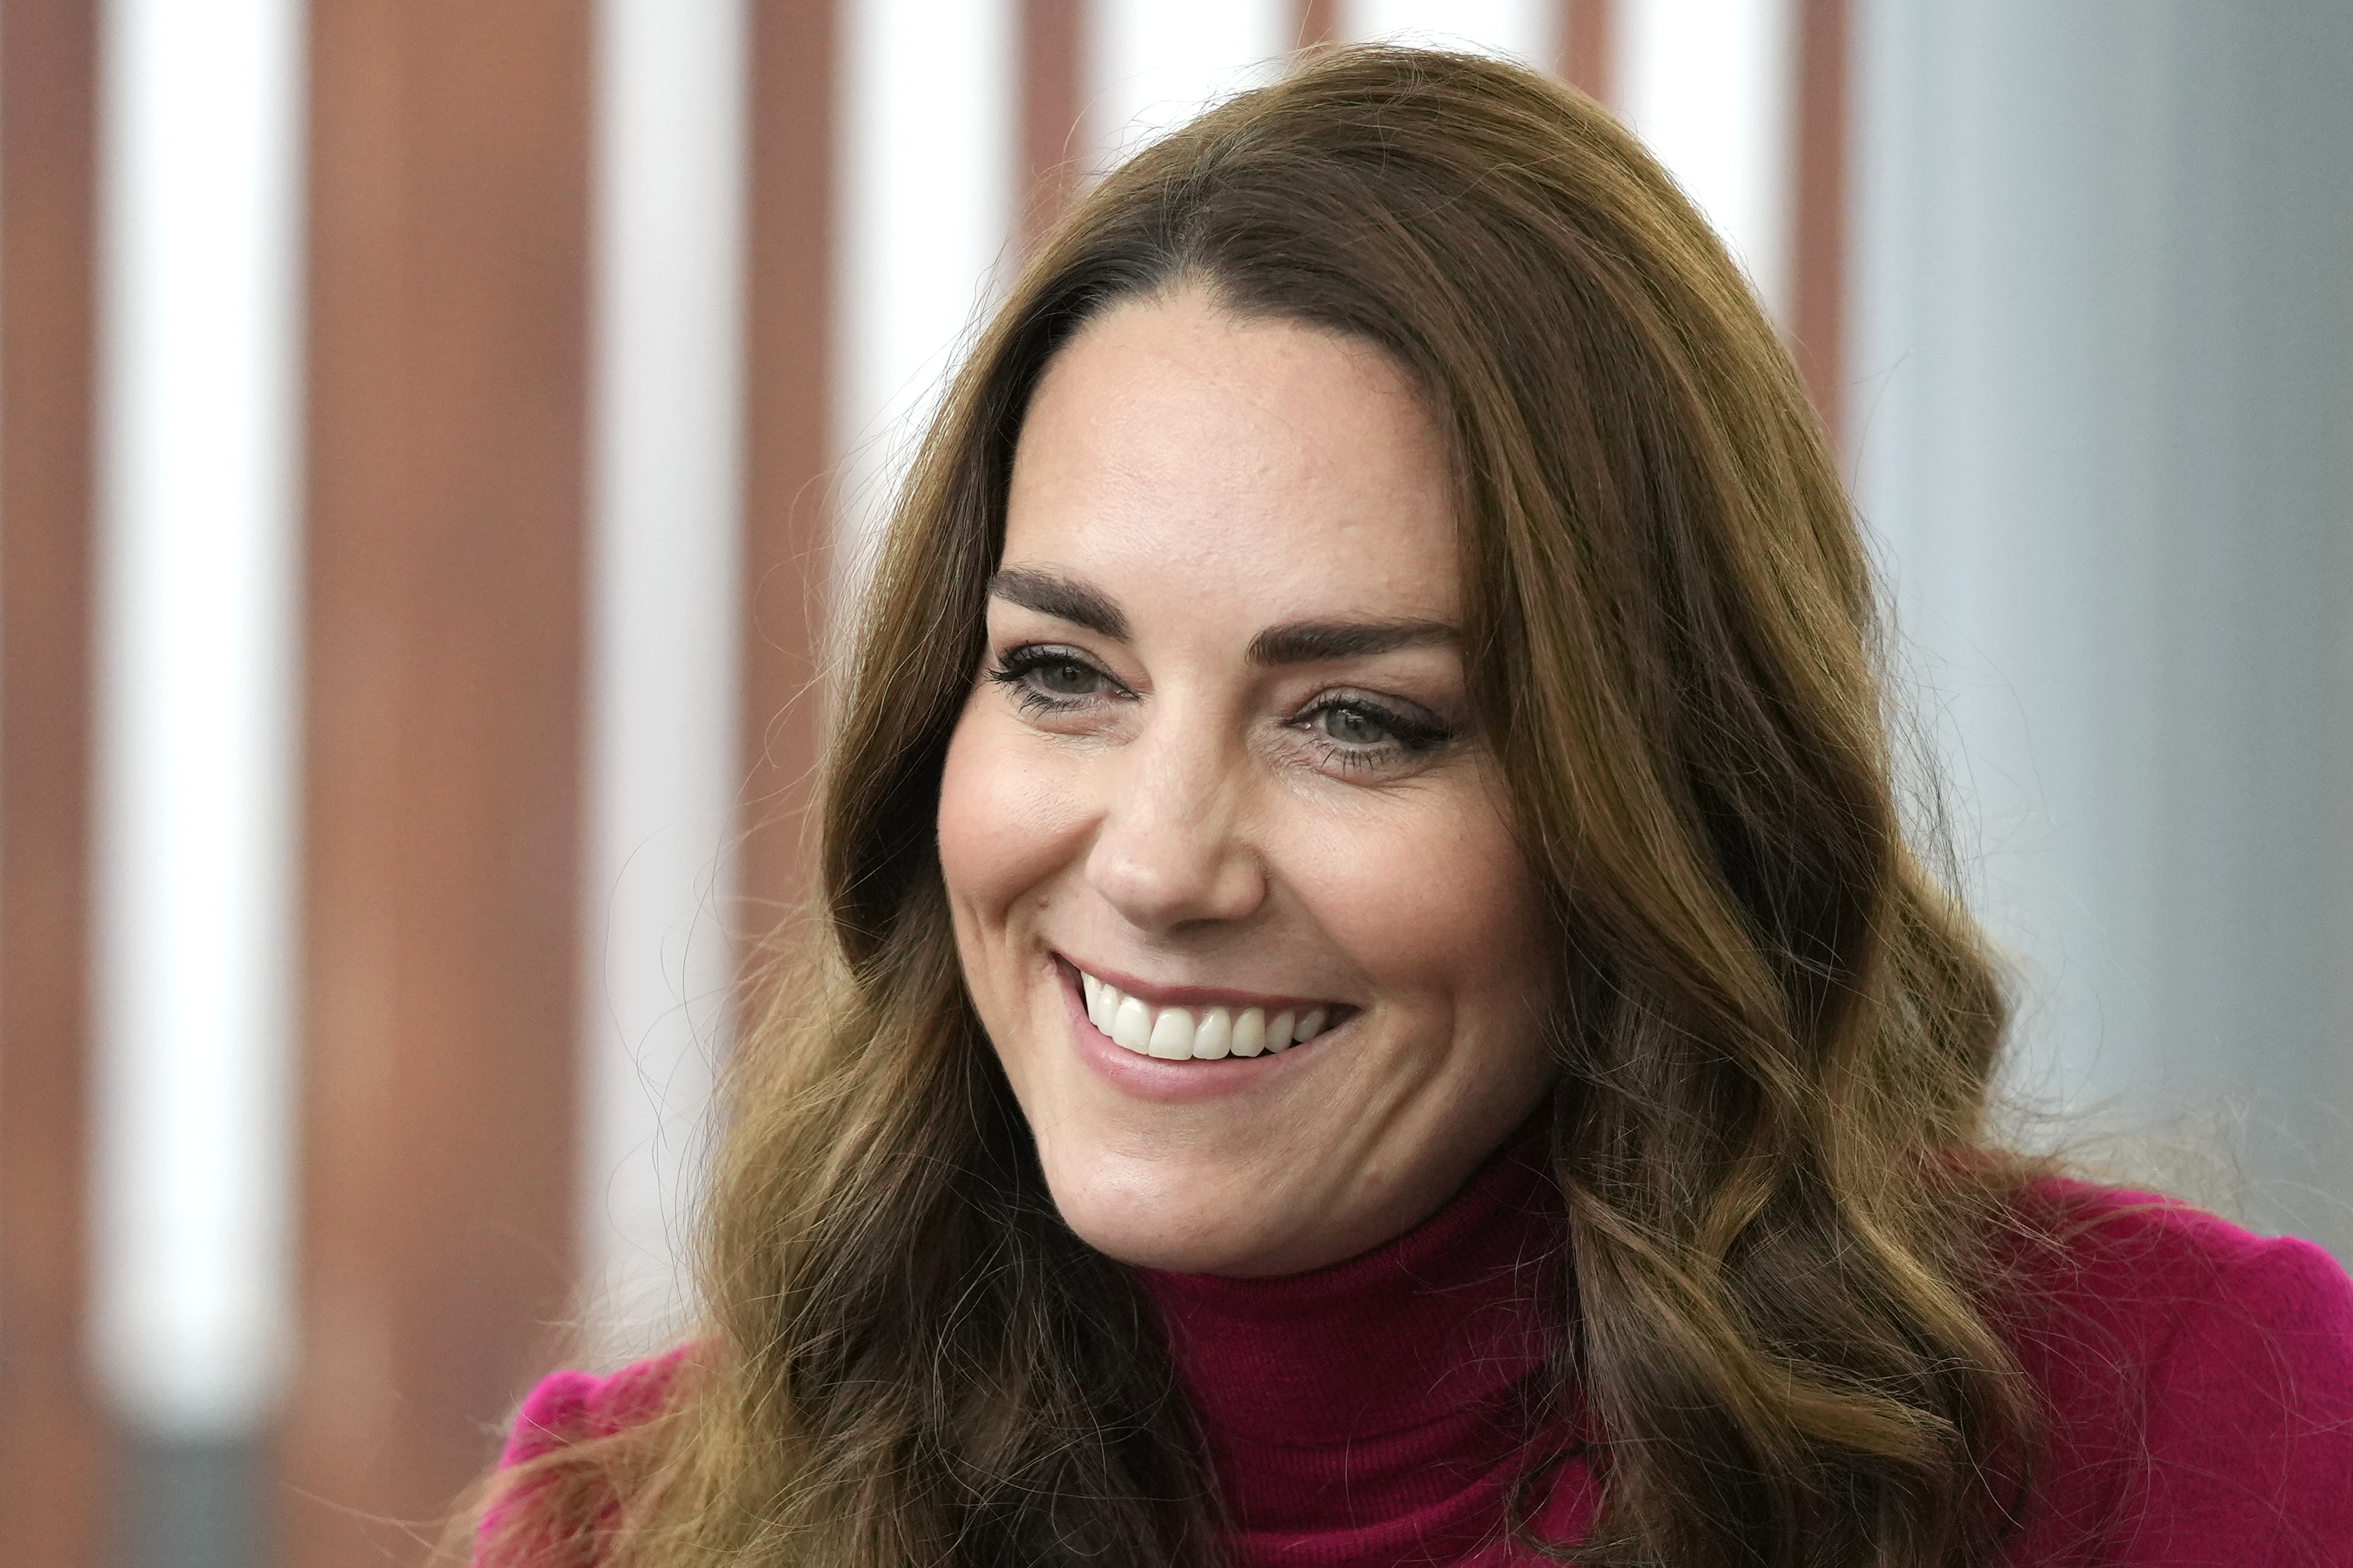 Princess Catherine visiting Nower Hill High School in London, England on November 24, 2021 | Source: Getty Images